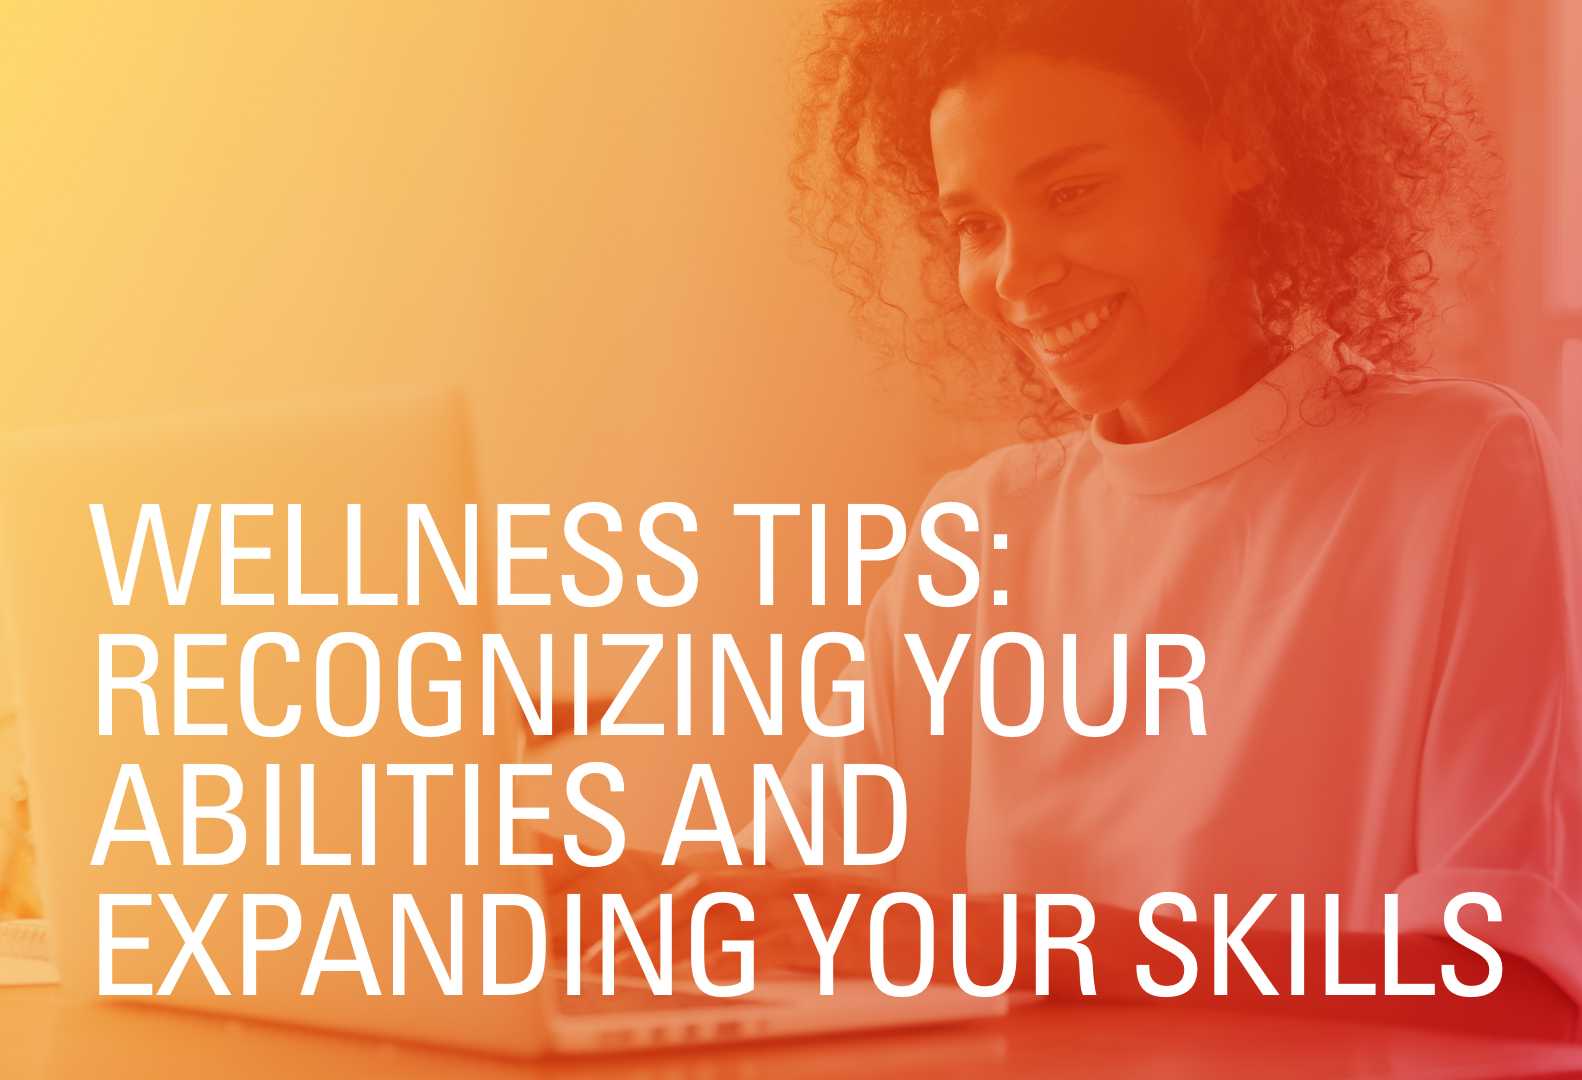 Wellness Tips: Recognizing Your Abilities and Expanding Your Skills